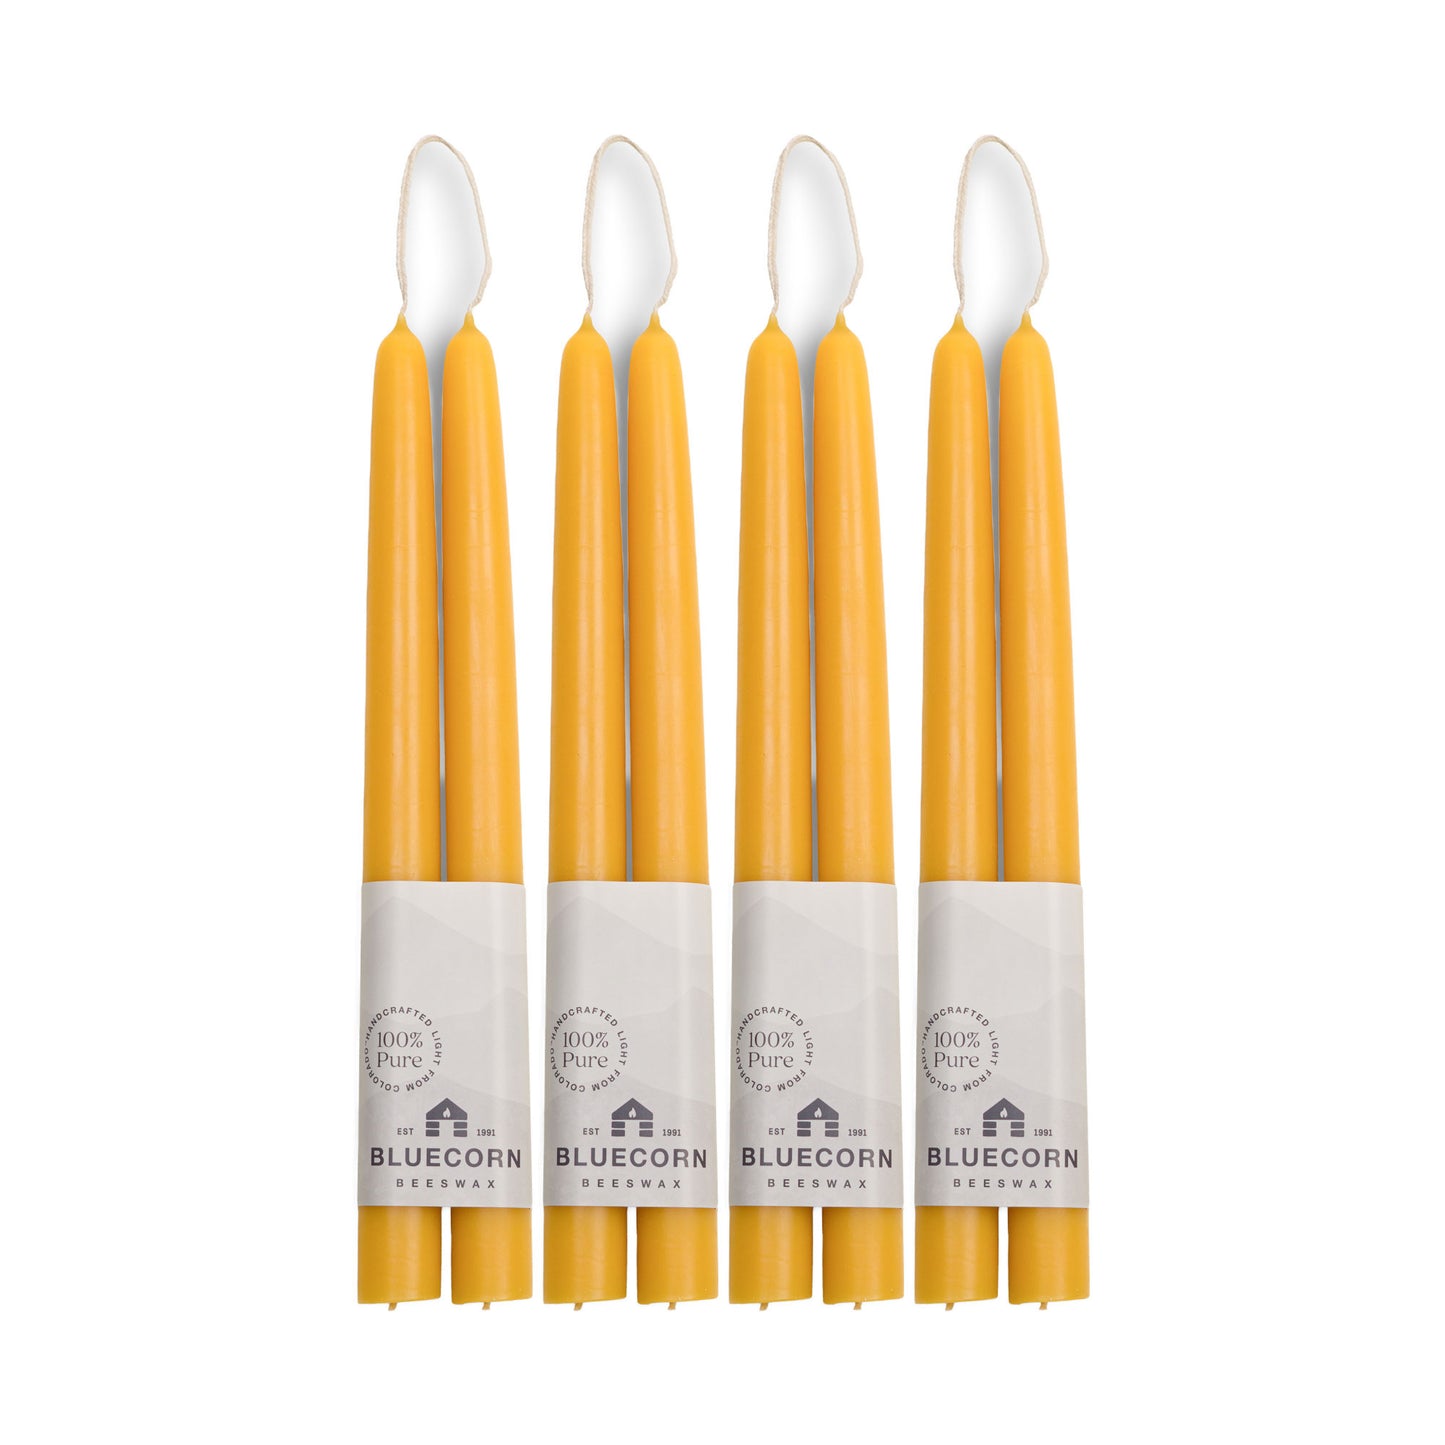 bluecorn beeswax taper candles pure beeswax candles raw beeswax tapers